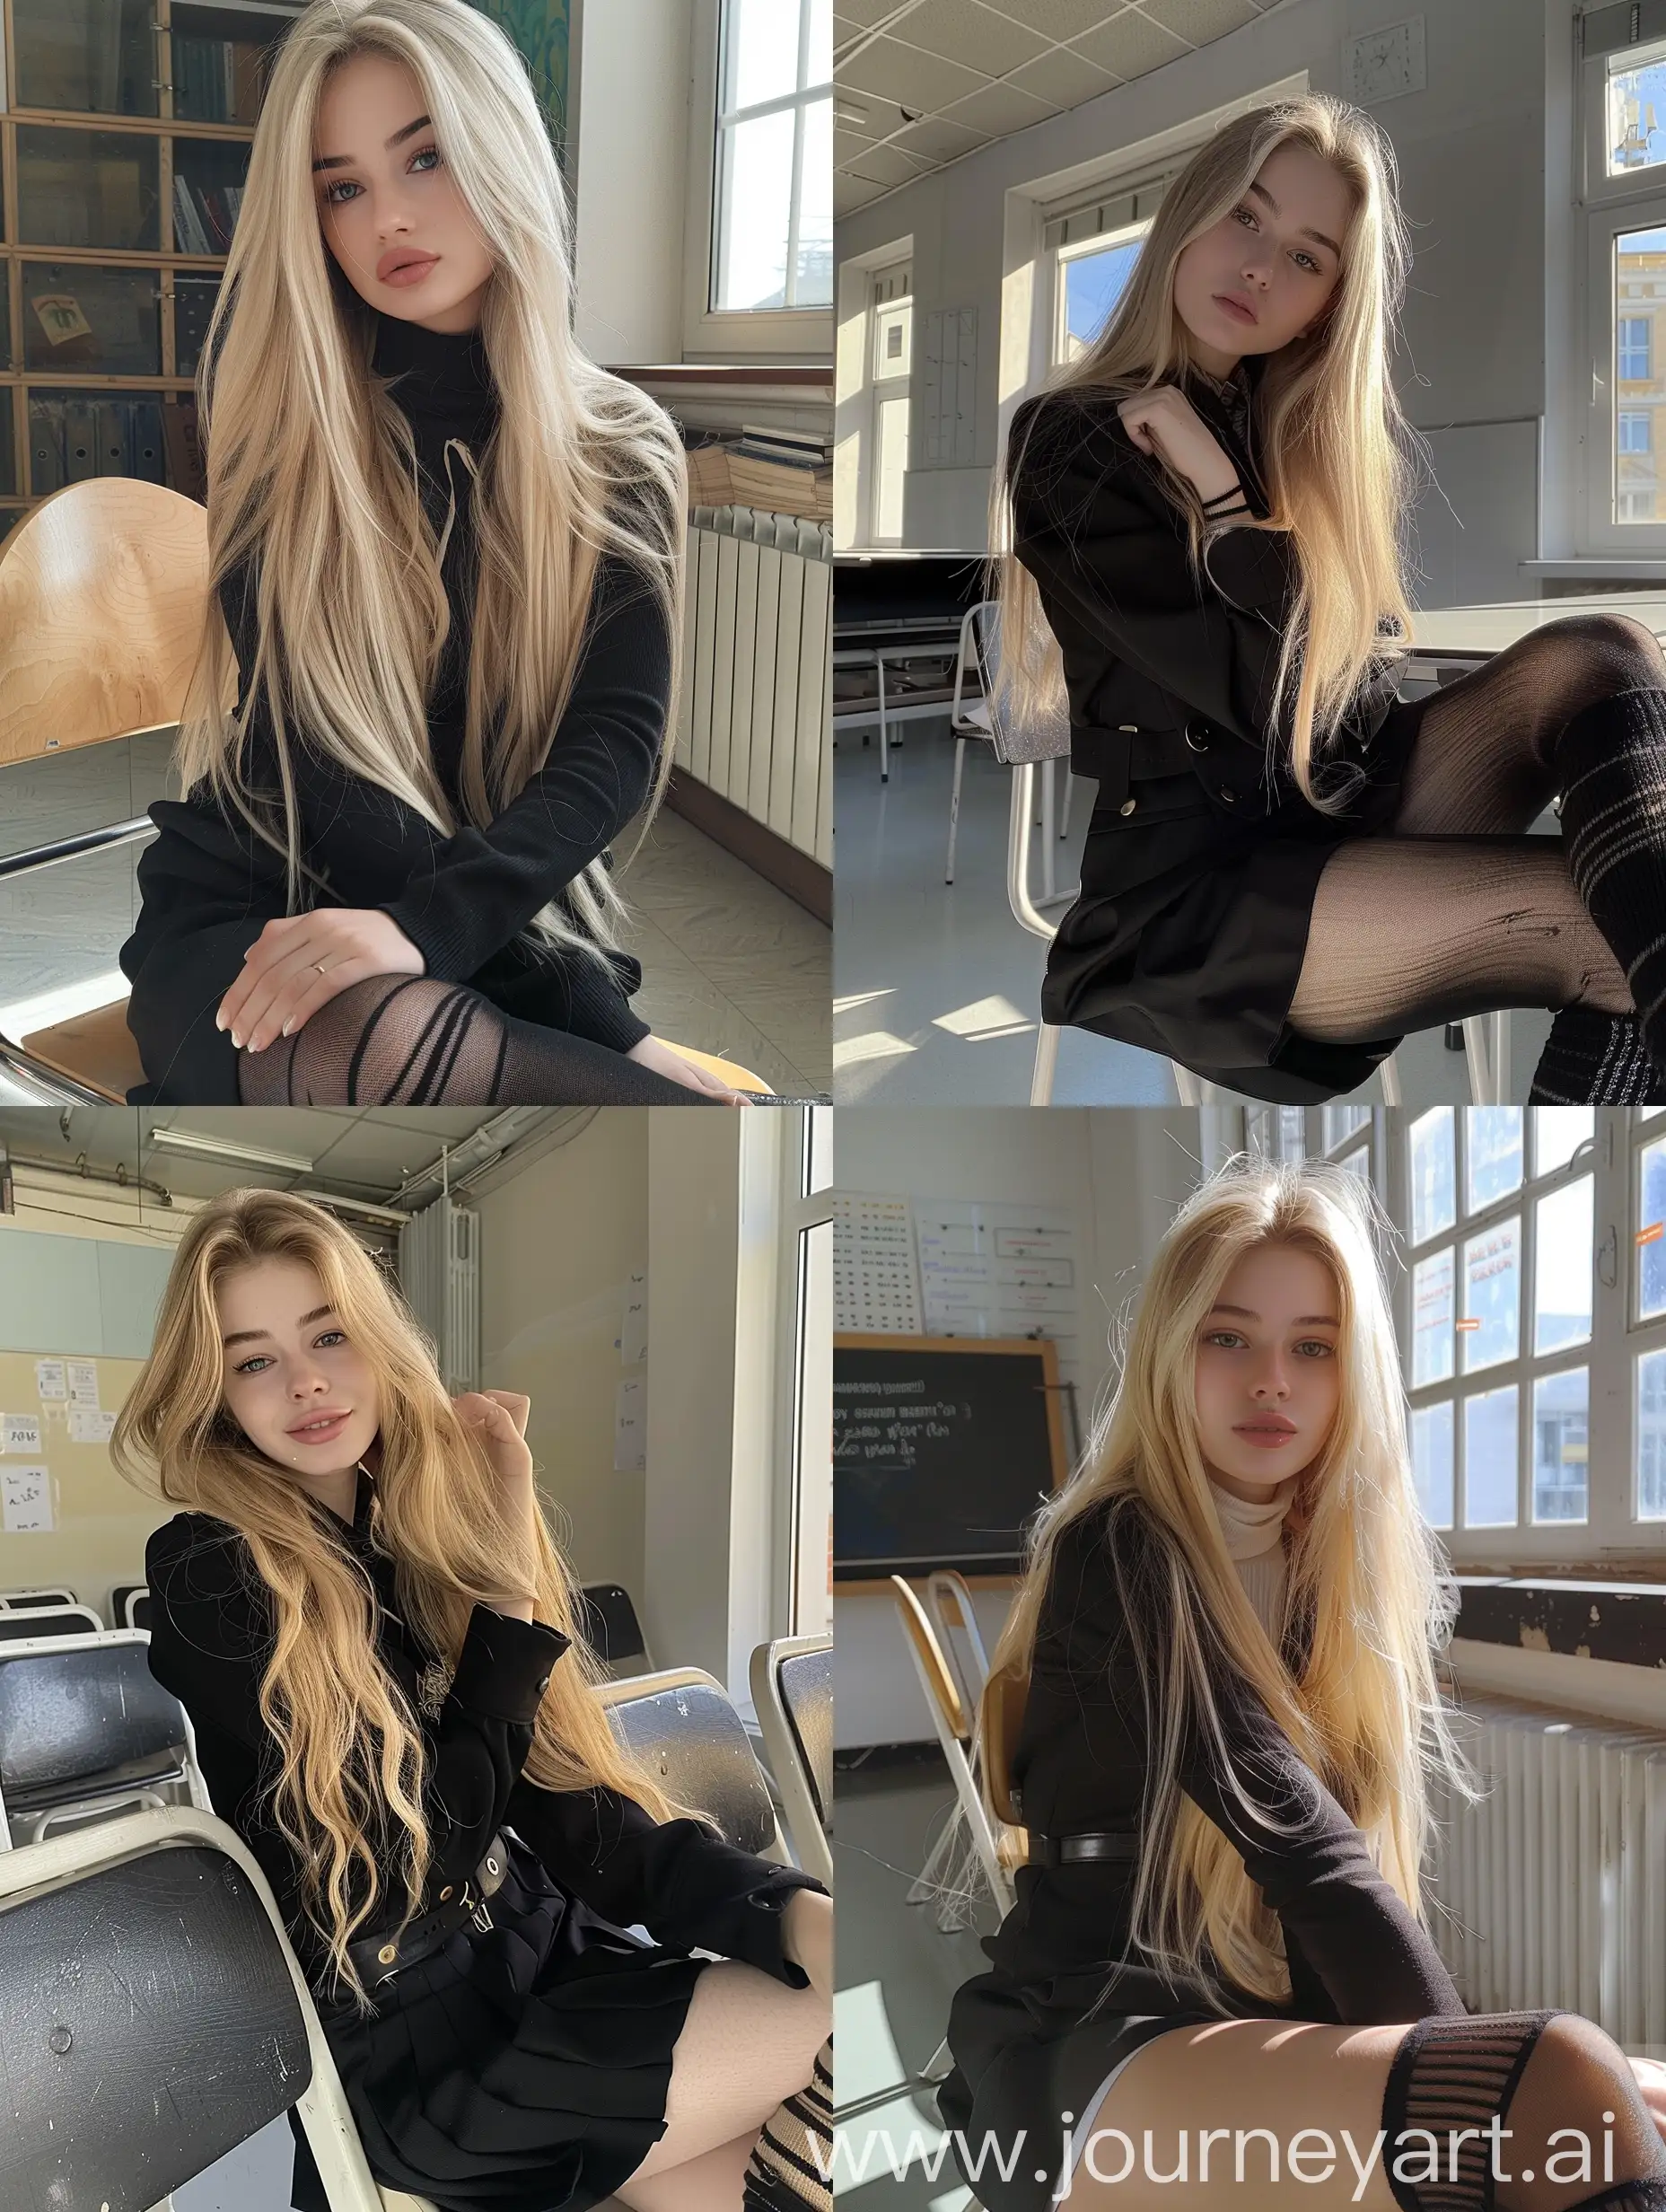 1 russian  girl,    long  blond  hair ,   22  years  old,    influencer,    beauty   ,     in  the  school    ,school black  uniform  ,  makeup,   smiling, chão view,      sitting  on  chair  ,    socks  and  boots,    no  effect,     selfie   , iphone  selfie,      no  filters ,   iphone  photo    natural